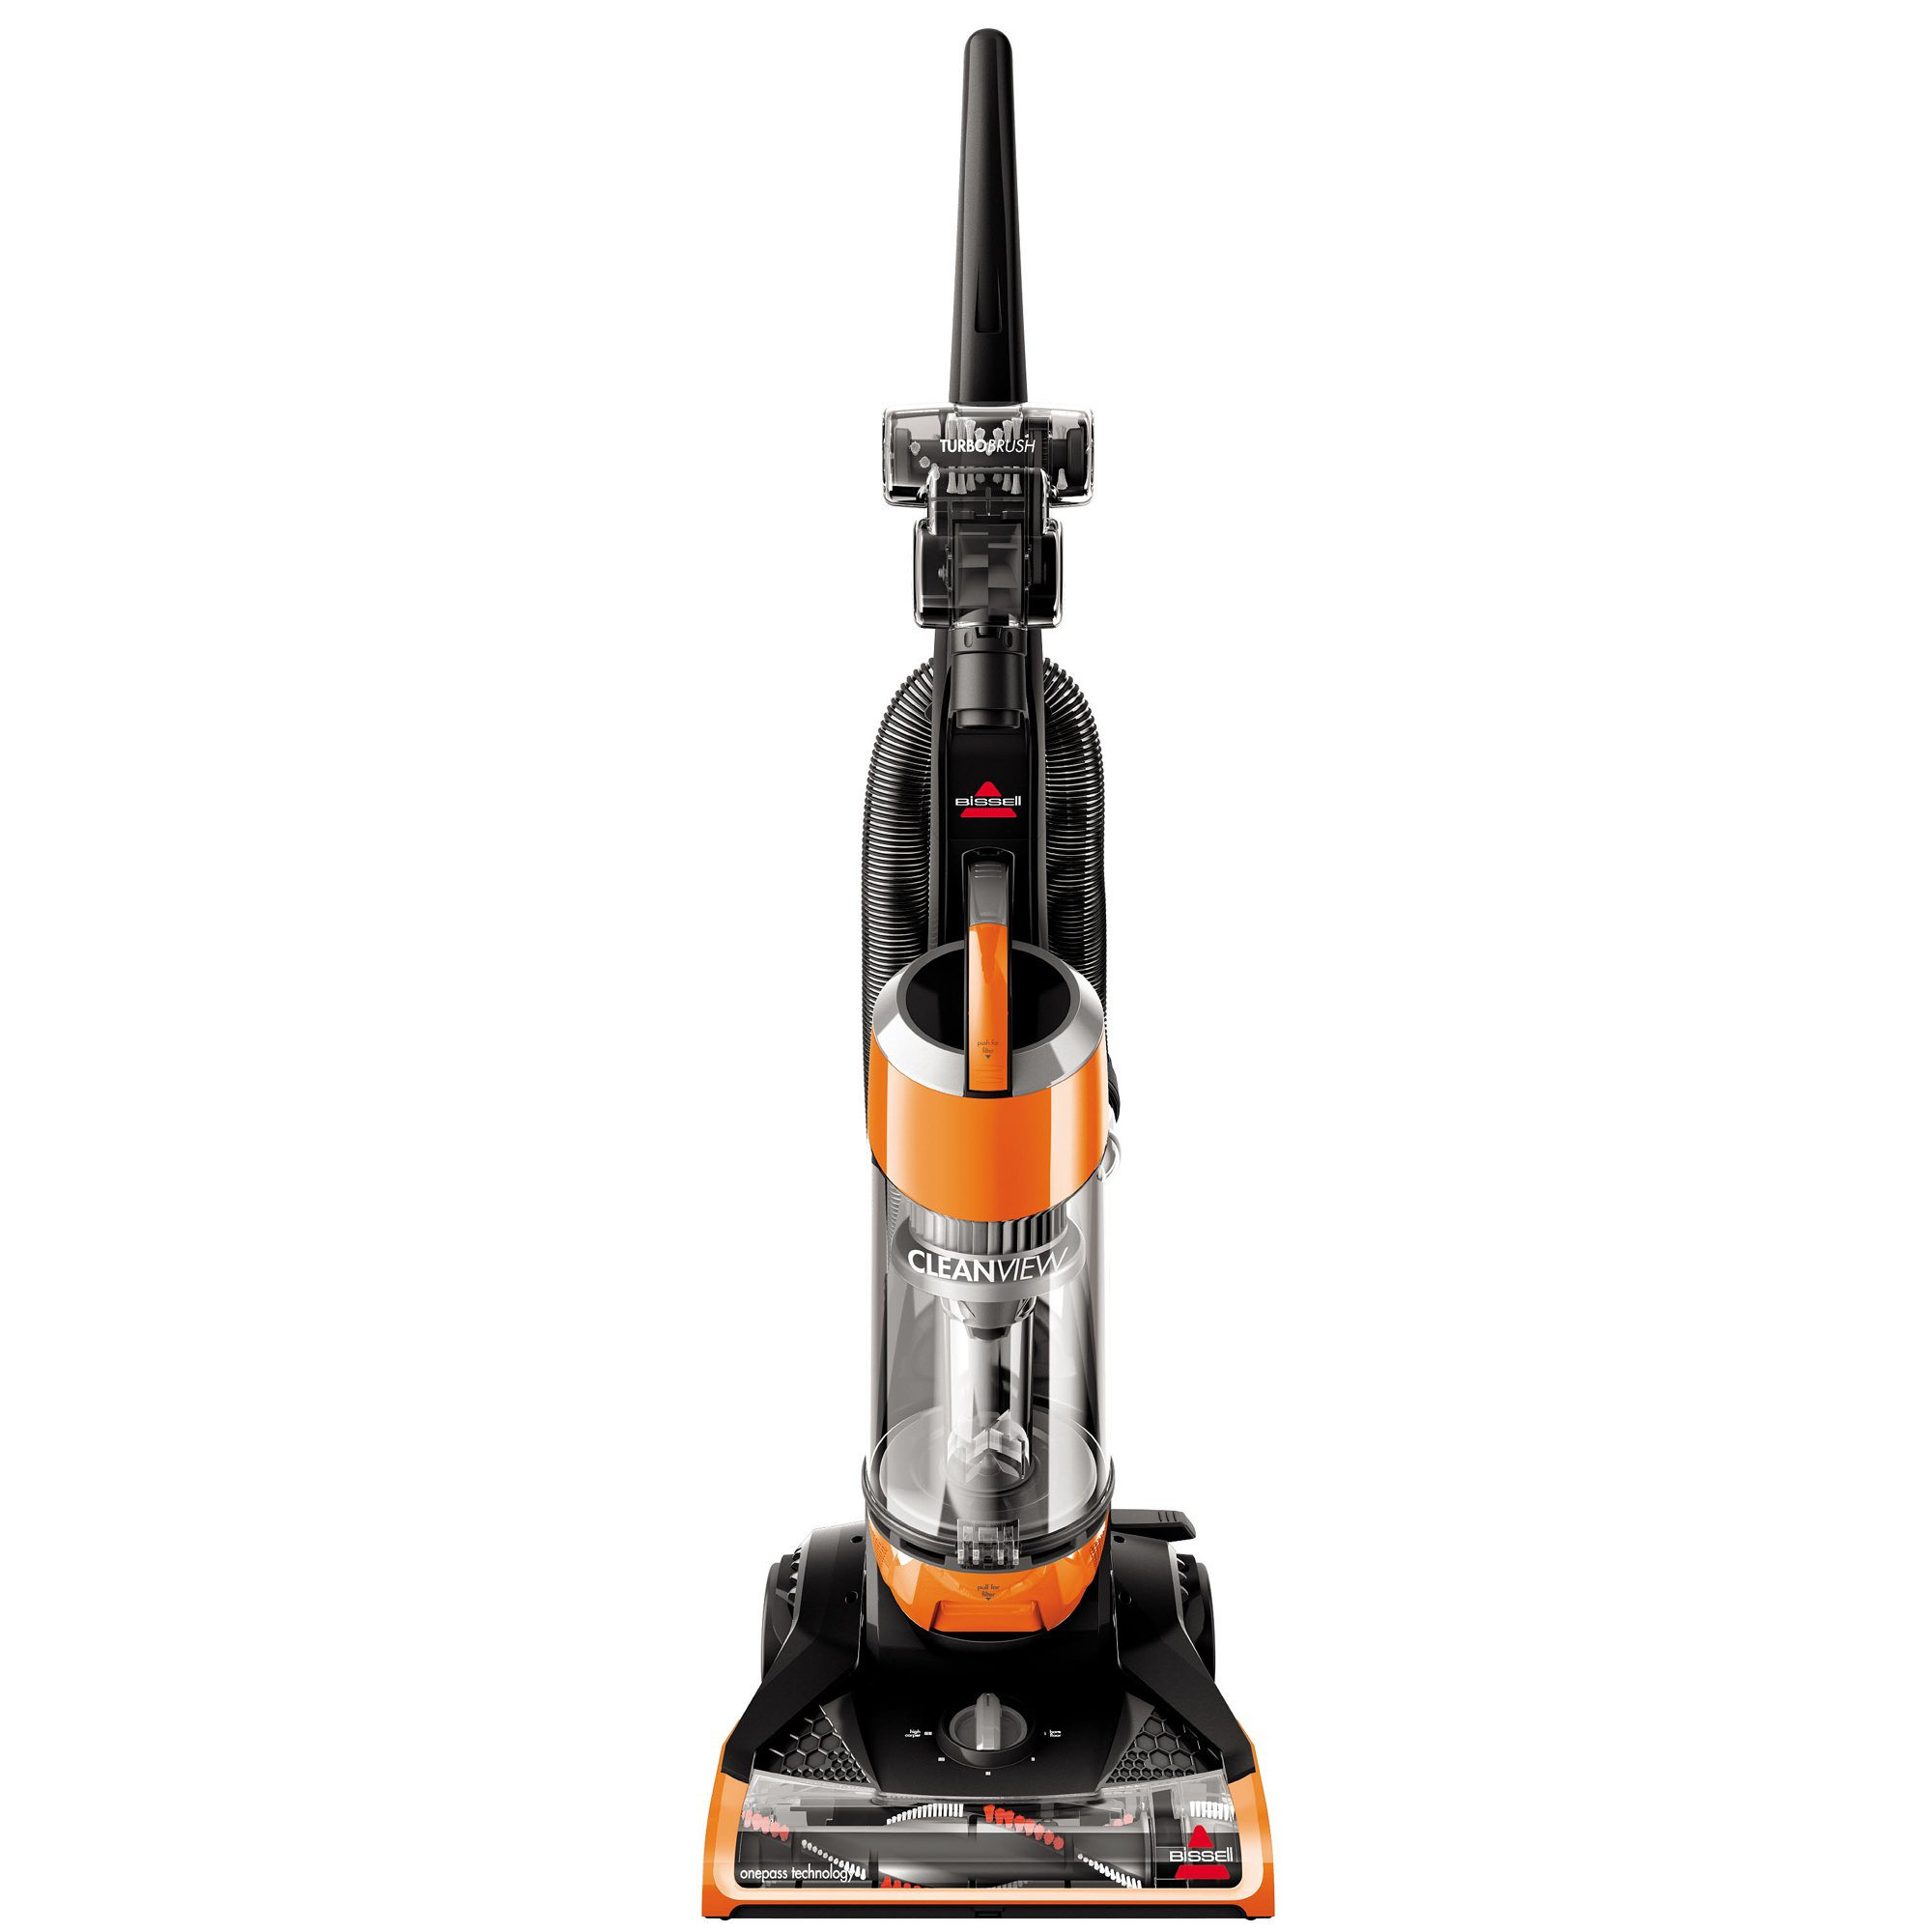 12 Best Best Vacuum for Pet Hair On Hardwood Floors 2022 free download best vacuum for pet hair on hardwood floors of best vacuum cleaners for home amazon com with regard to bissell cleanview upright bagless vacuum cleaner with onepass technology 1831